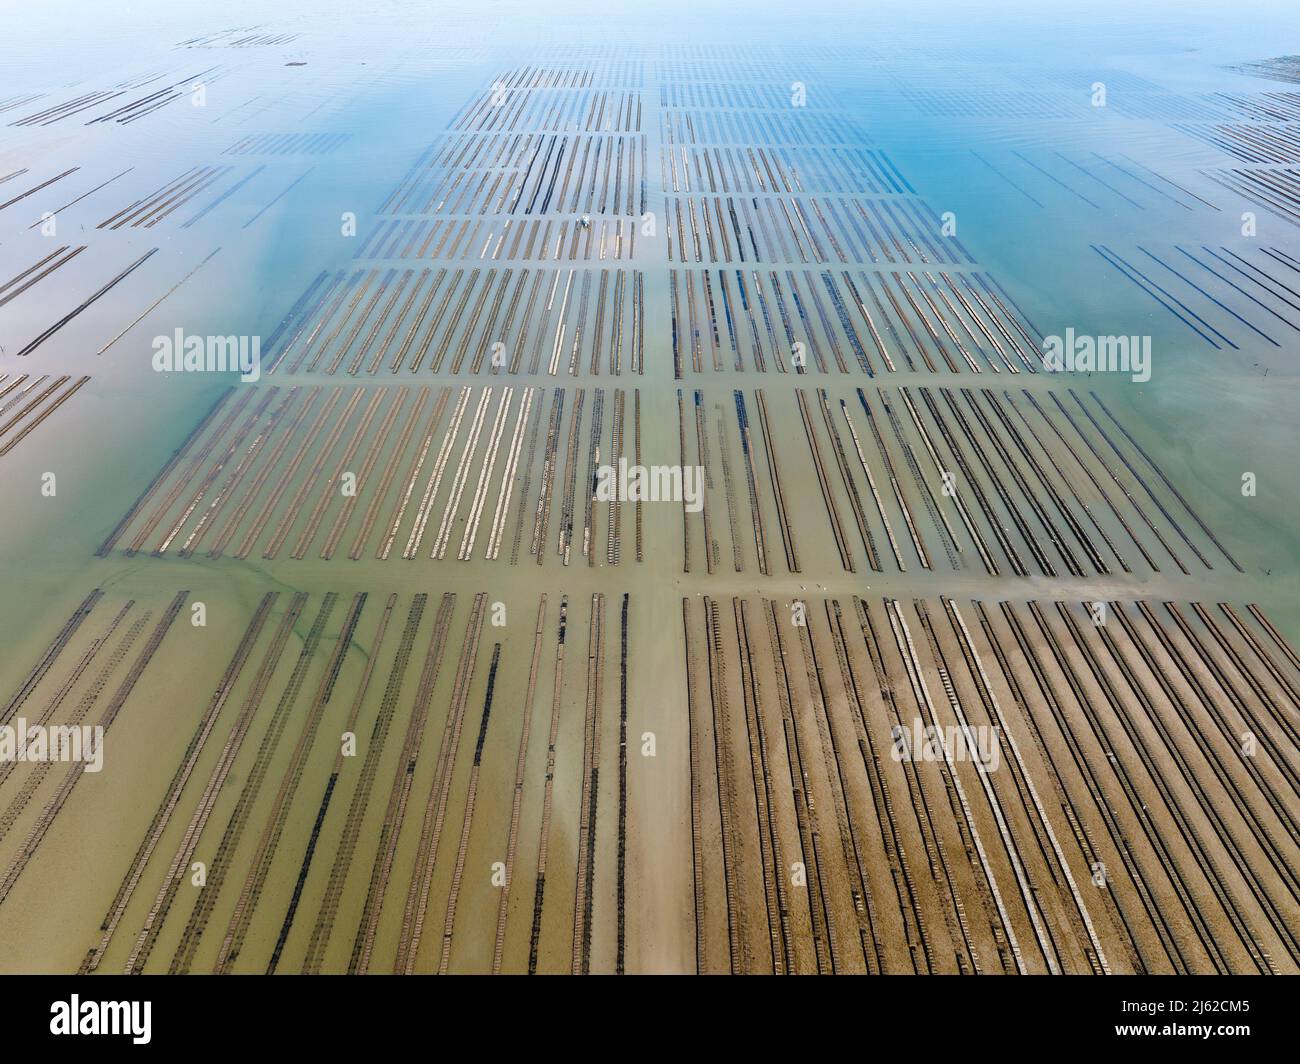 Oyster farming at Grandcamp Maisy, Normandy, aerial view Stock Photo